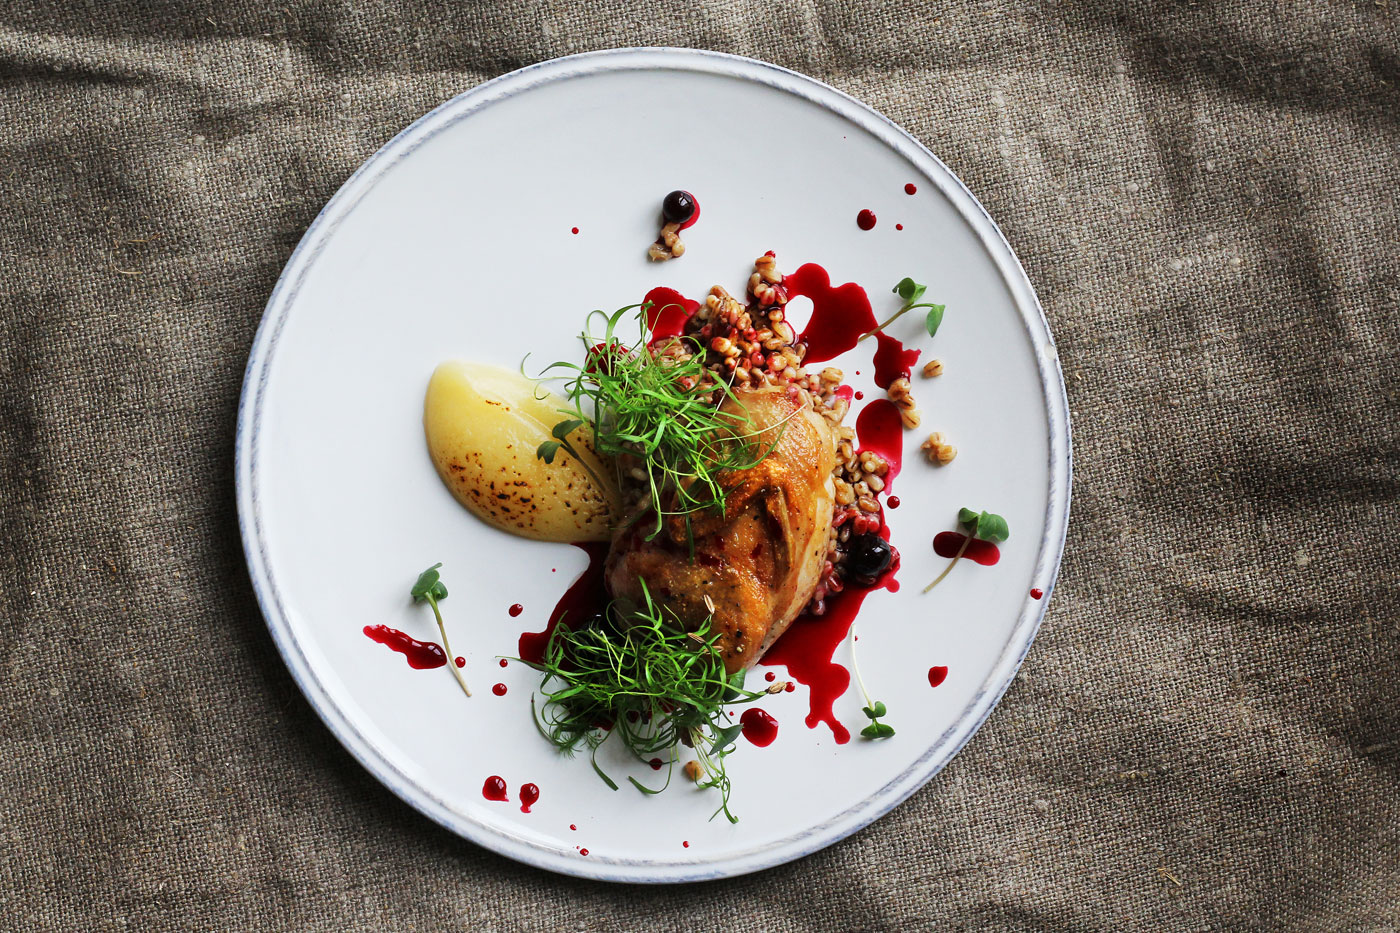 Russian-French Gastronomic Seasons: Quail with pearl barley and apple puree